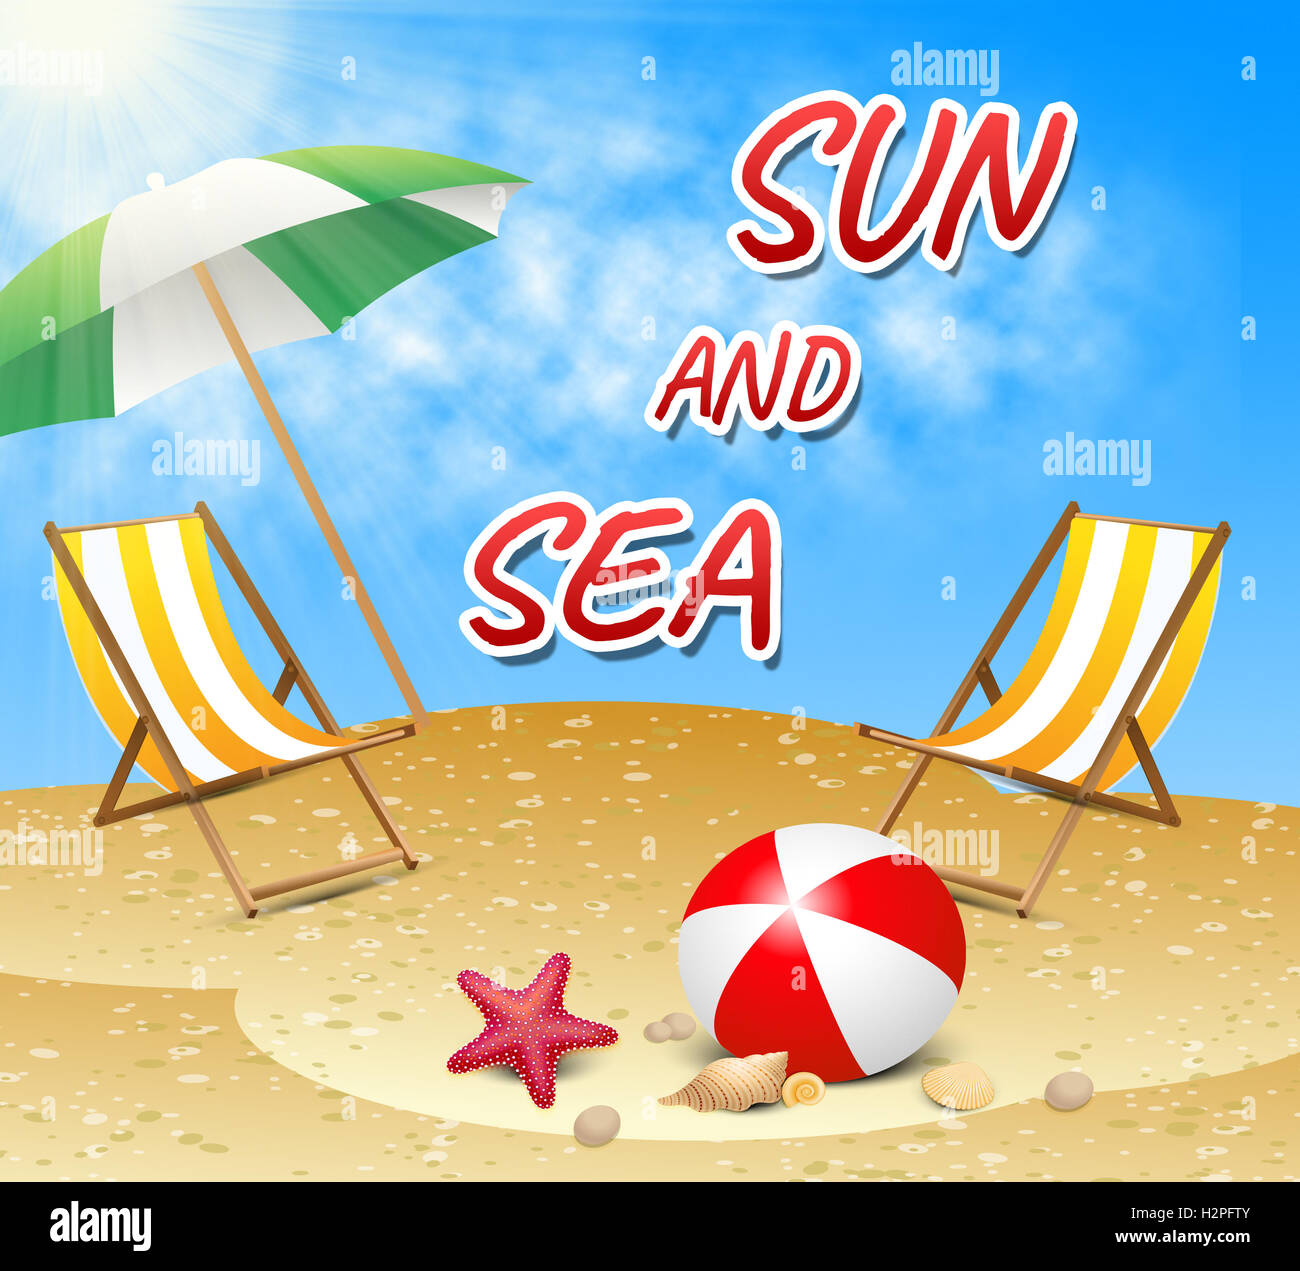 Sun And Sea Representing Summer Time And Seafront Stock Photo